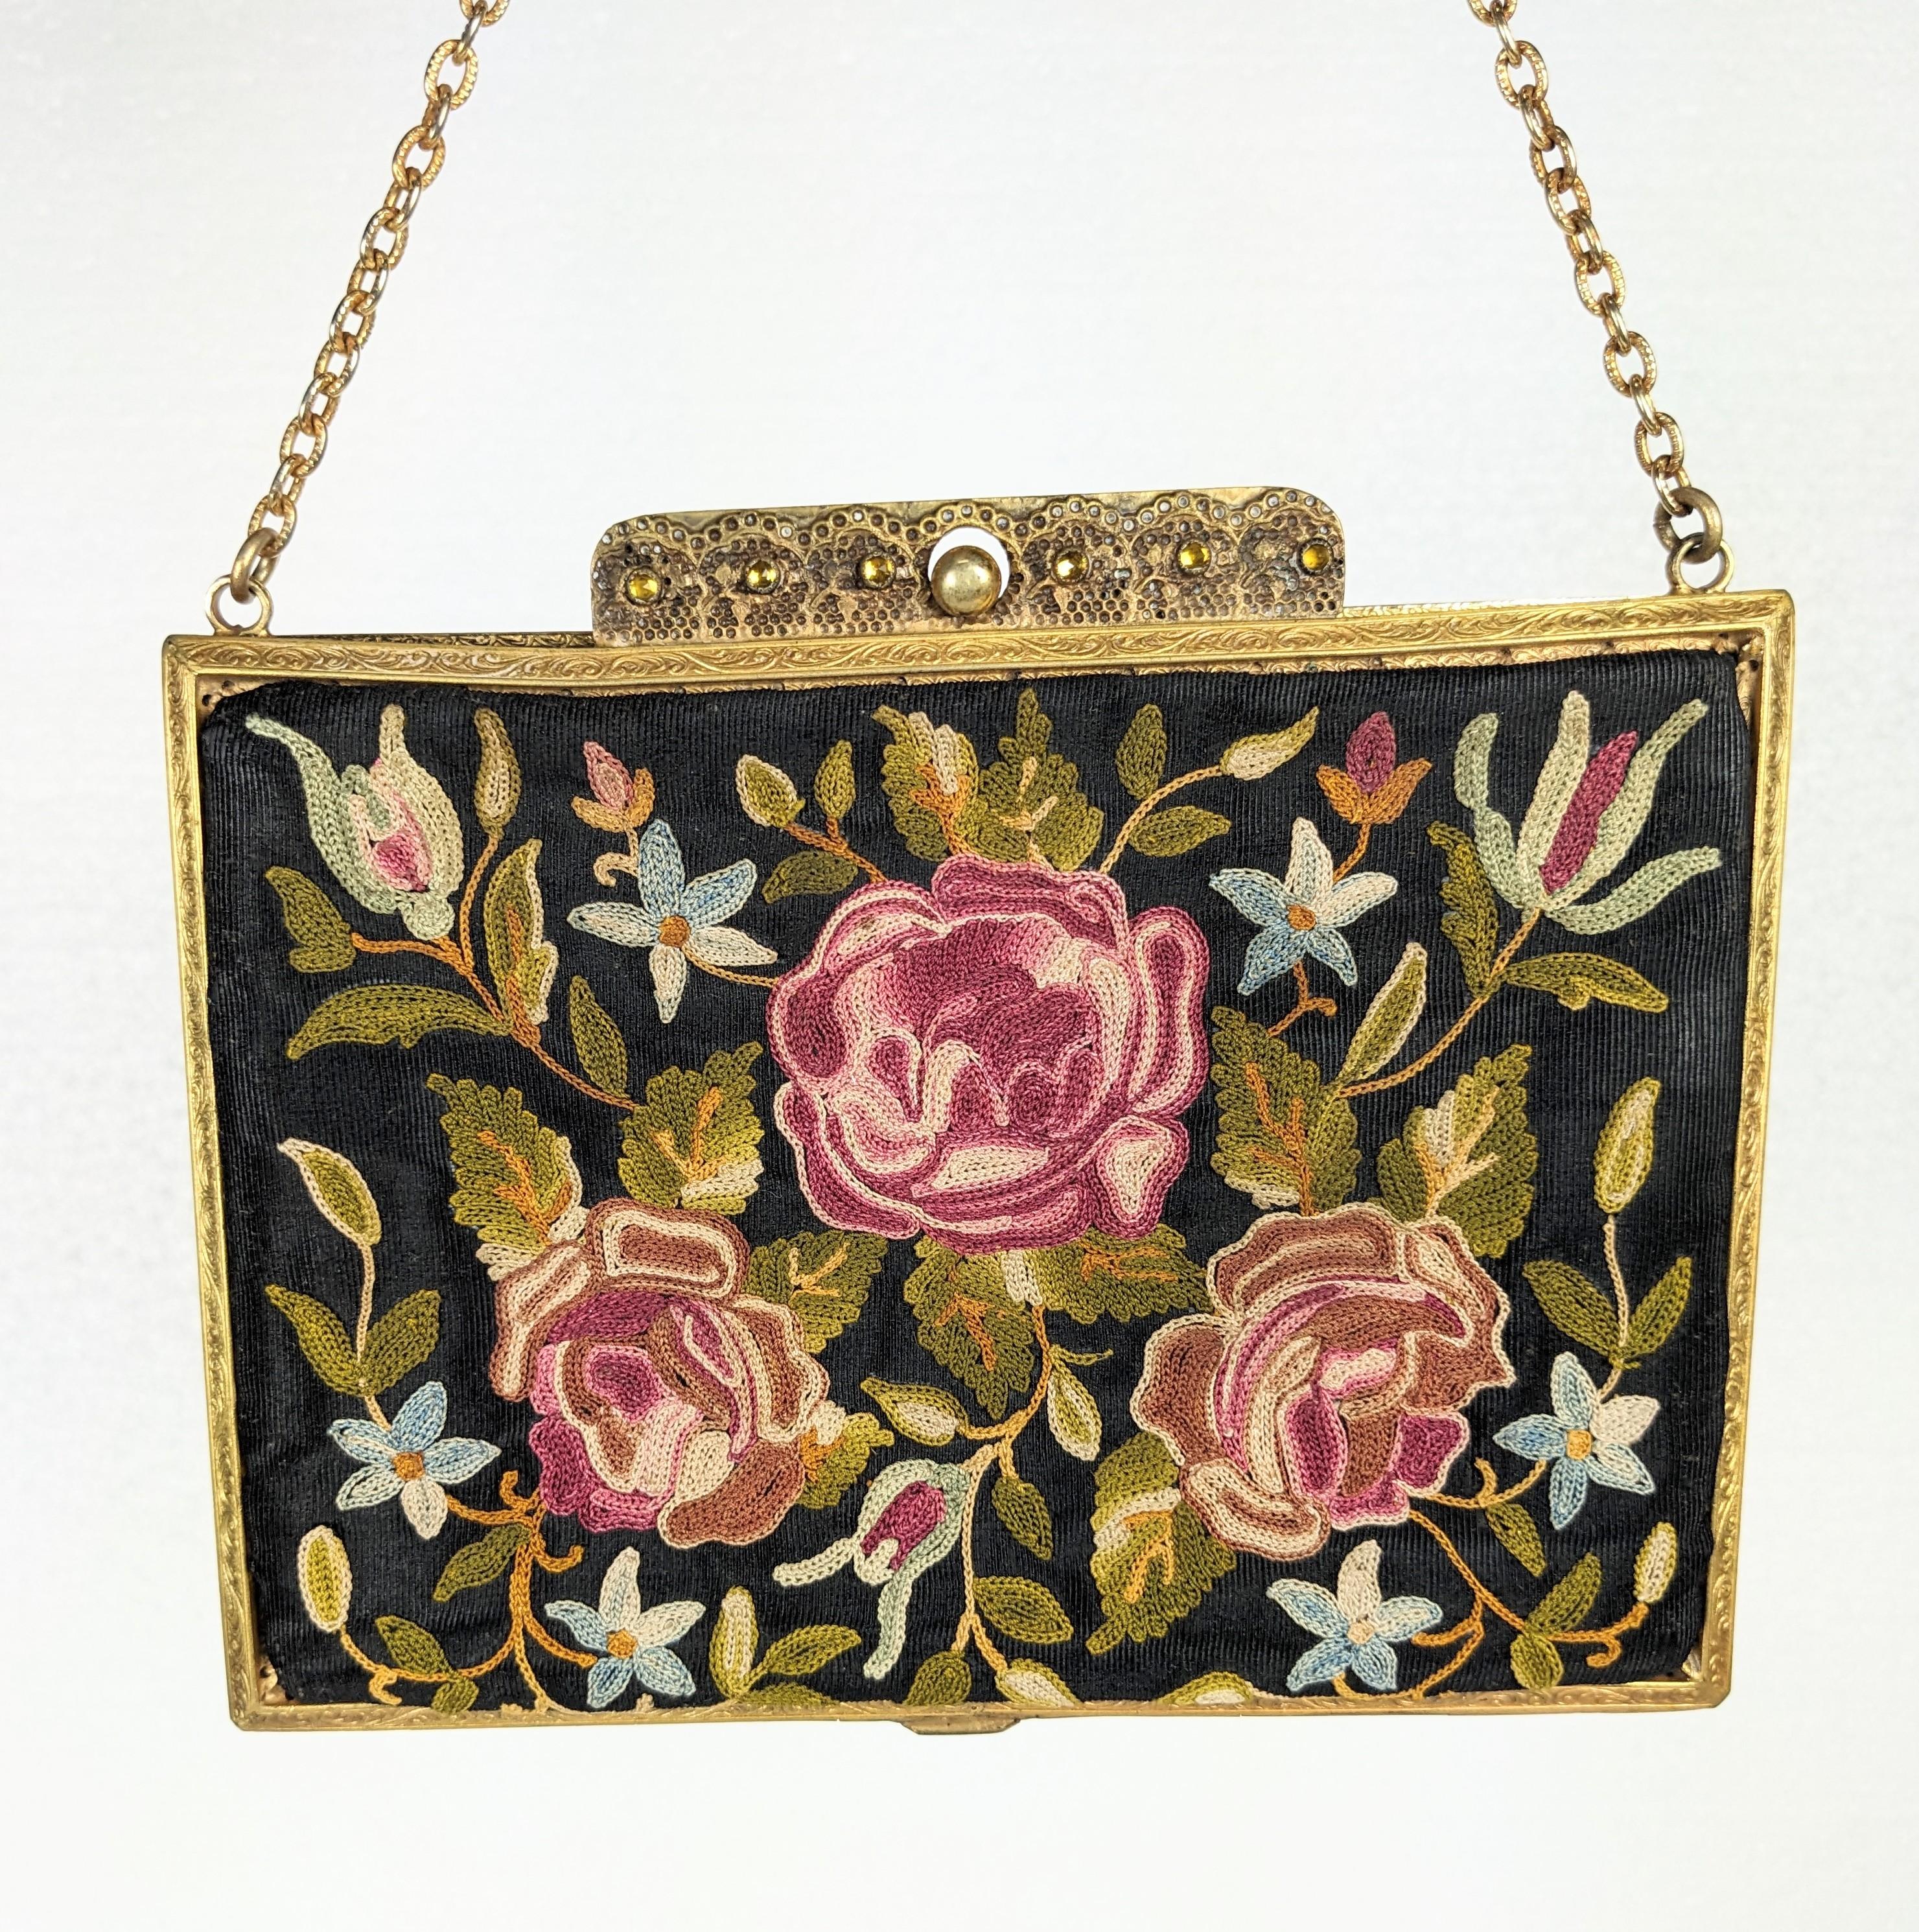  Edwardian Beauvais Embroidered Bag In Good Condition For Sale In New York, NY